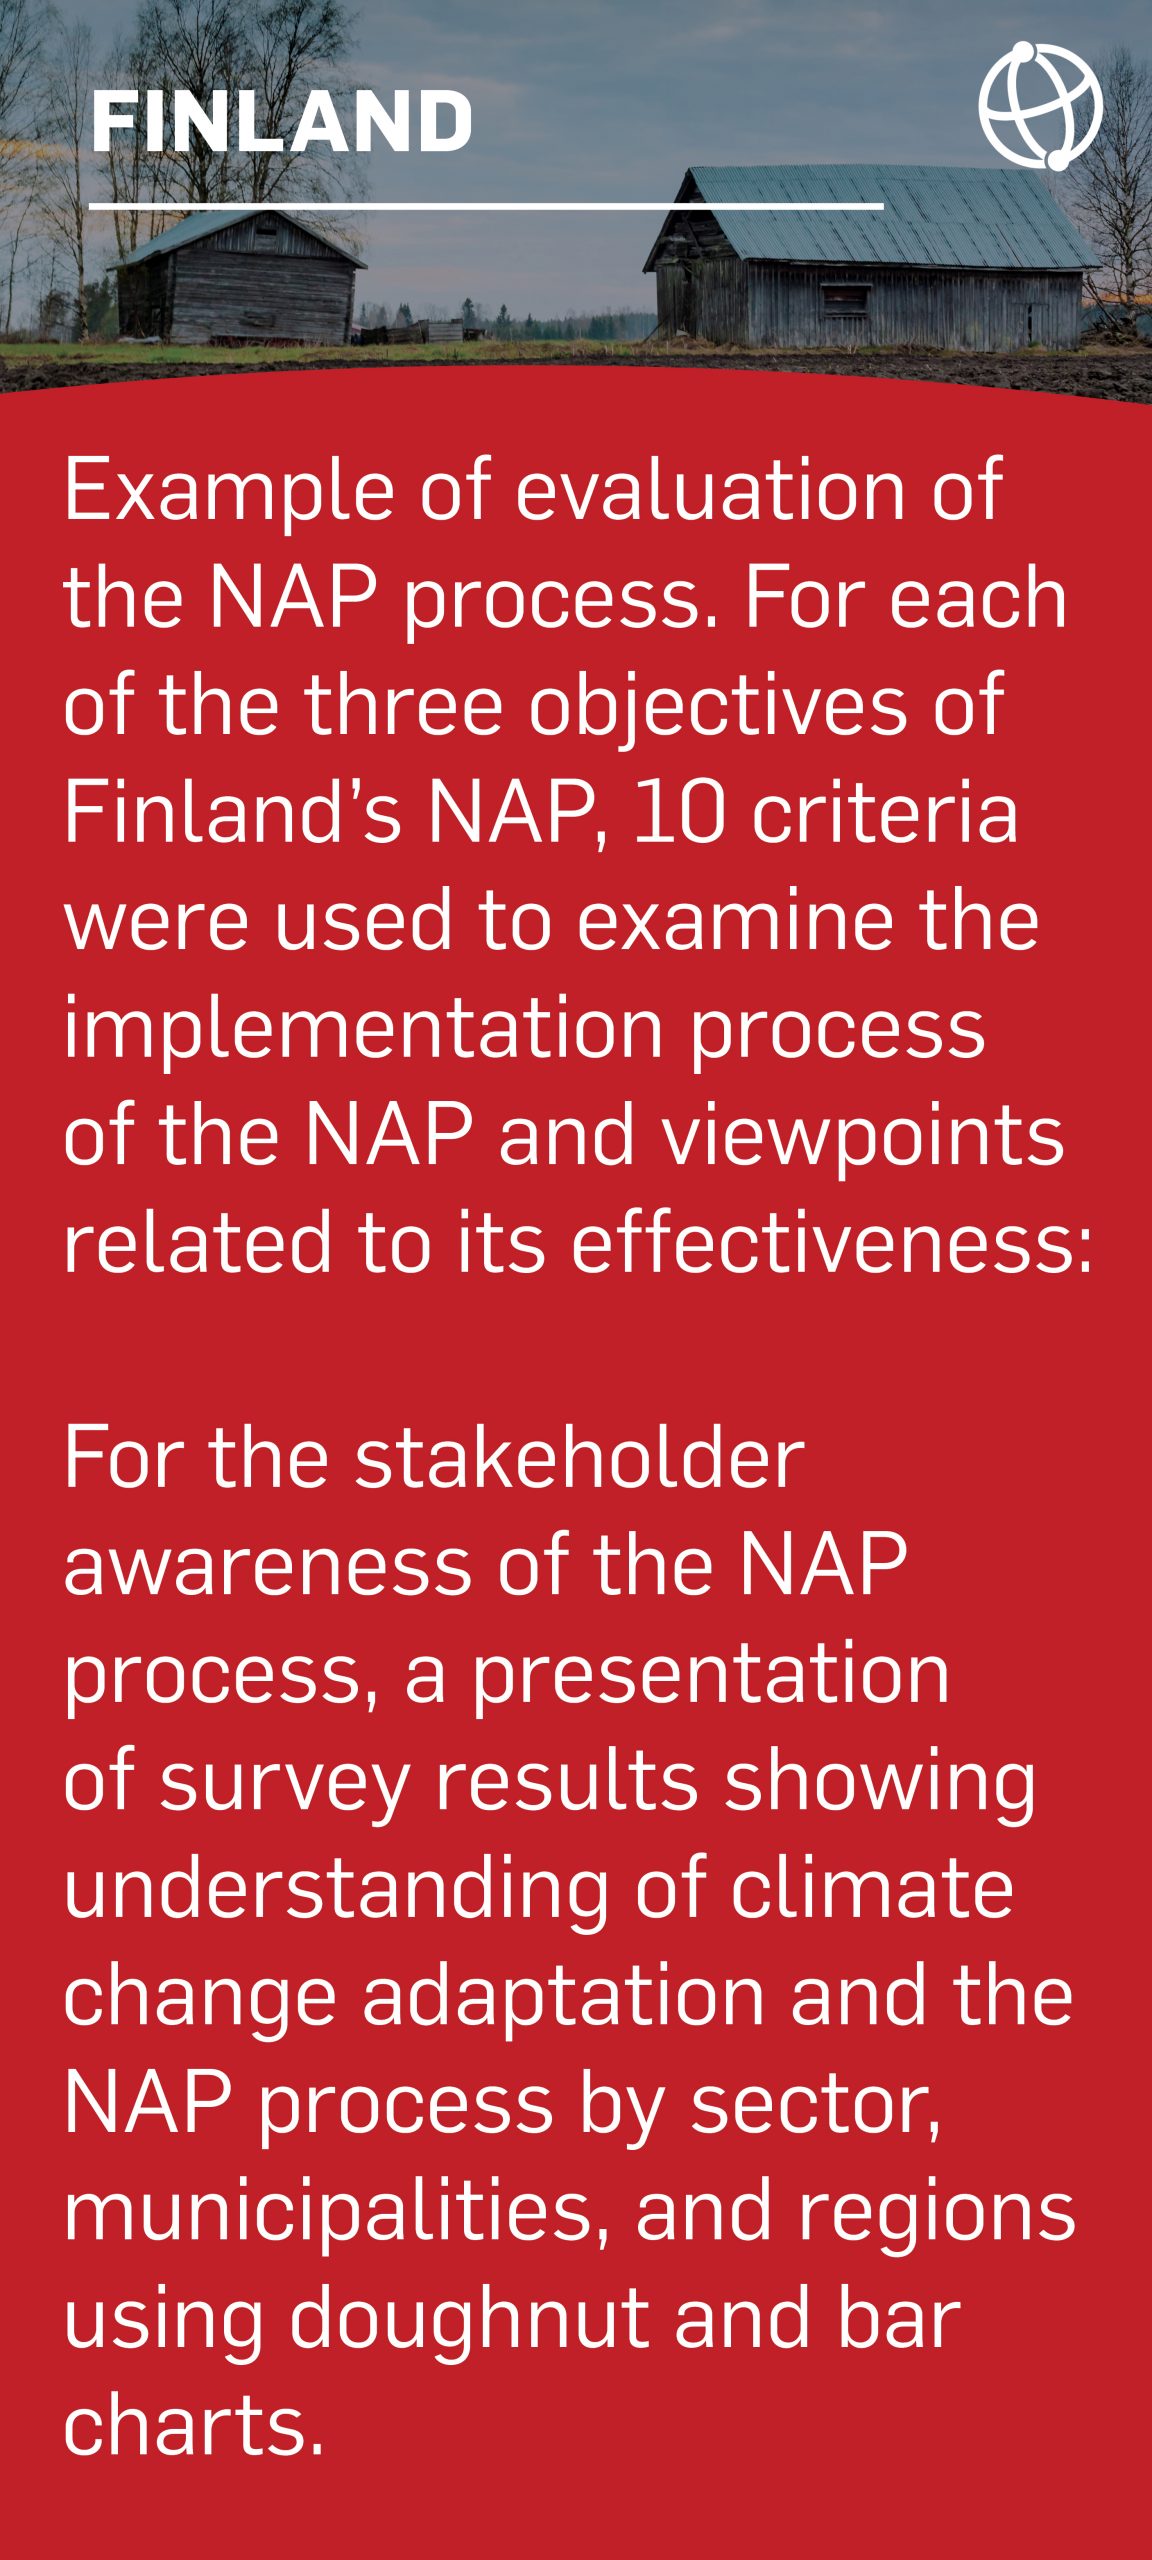 Example of evaluation of the NAP process. For each of the three objectives of Finland’s NAP, 10 criteria were used to examine the implementation process of the NAP and viewpoints related to its effectiveness: For the stakeholder awareness of the NAP process, a presentation of survey results showing understanding of climate change adaptation and the NAP process by sector, municipalities, and regions using doughnut and bar charts.